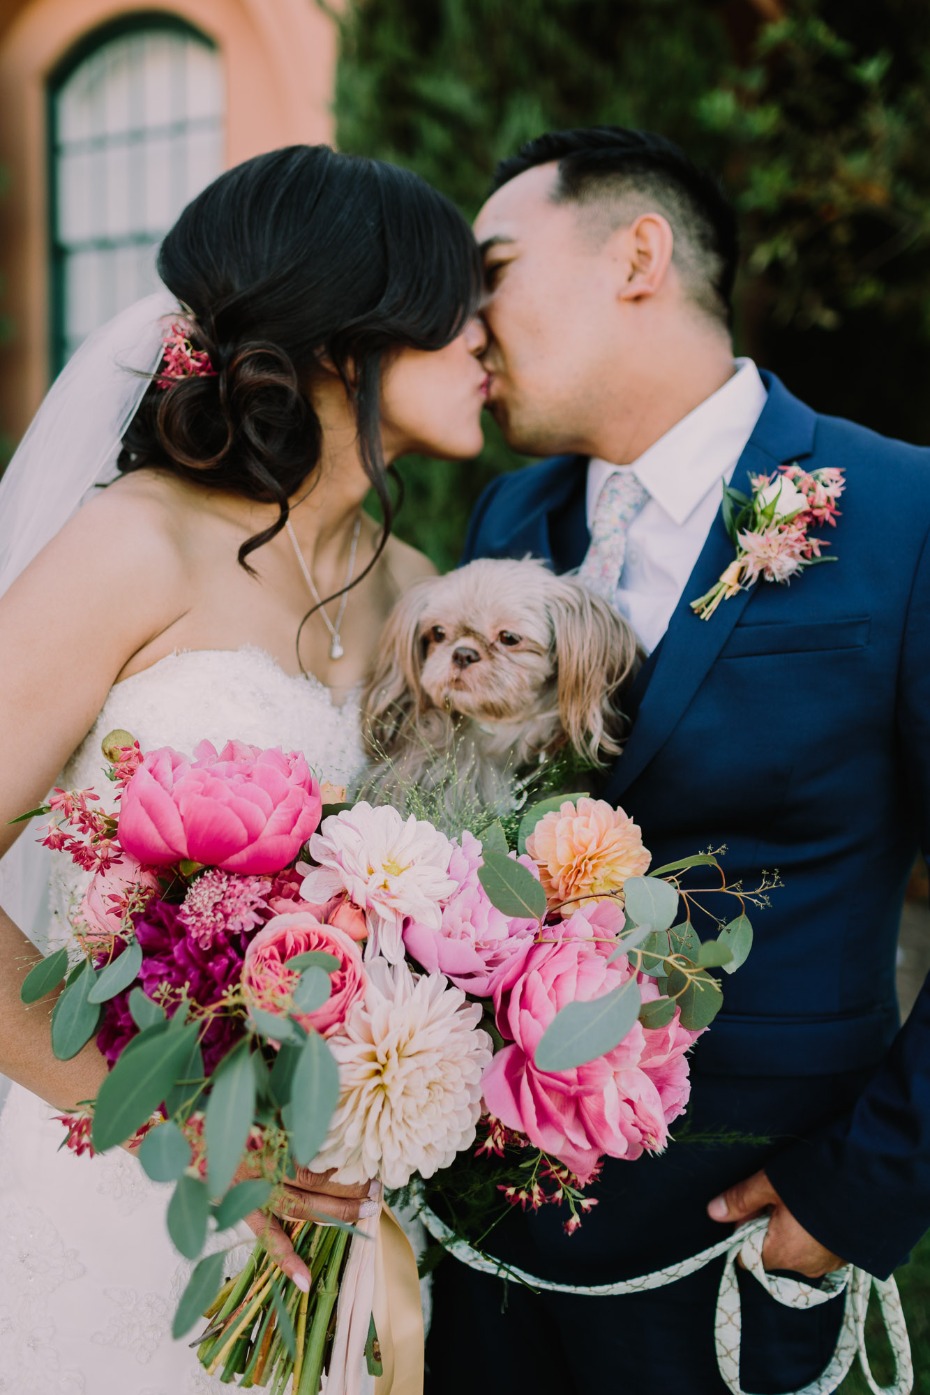 Don't forget your furry friends on your wedding day